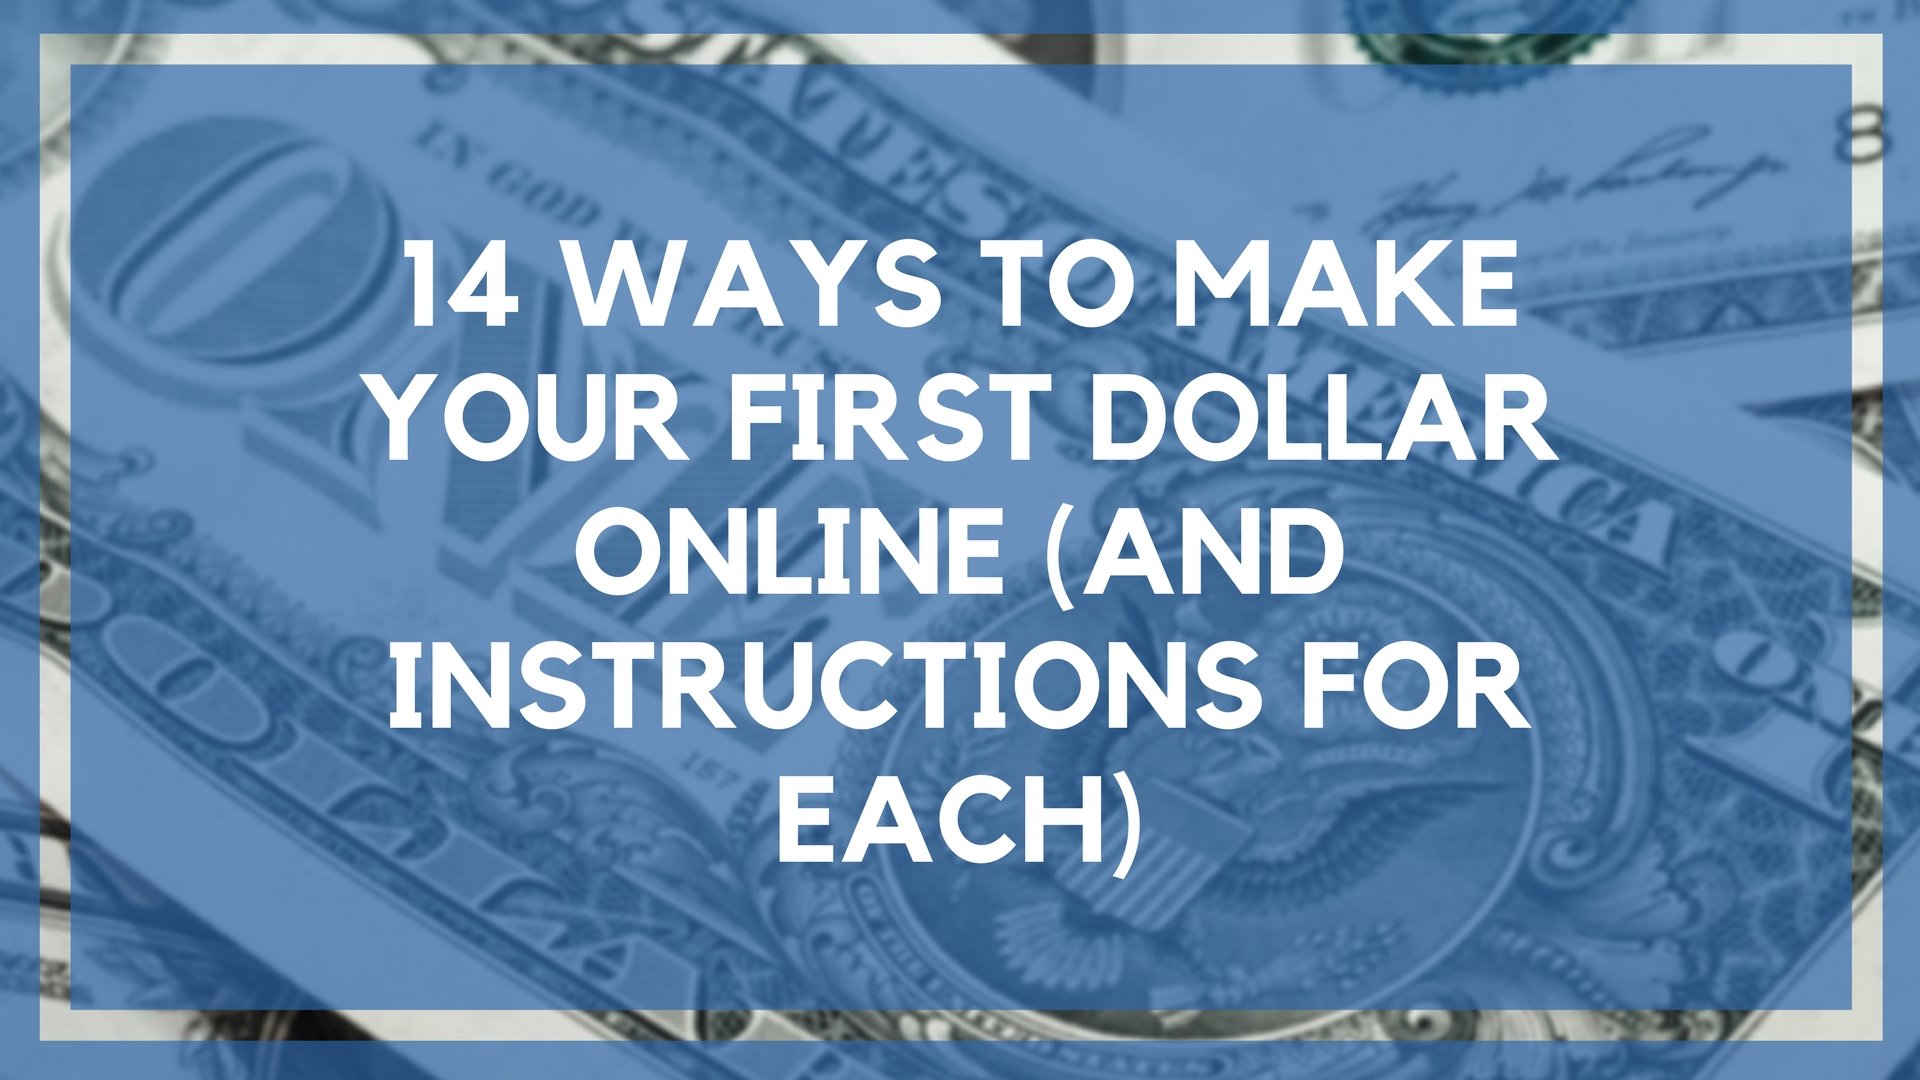 14 Ways to Make Your First Dollar Online (And Instructions for Each)